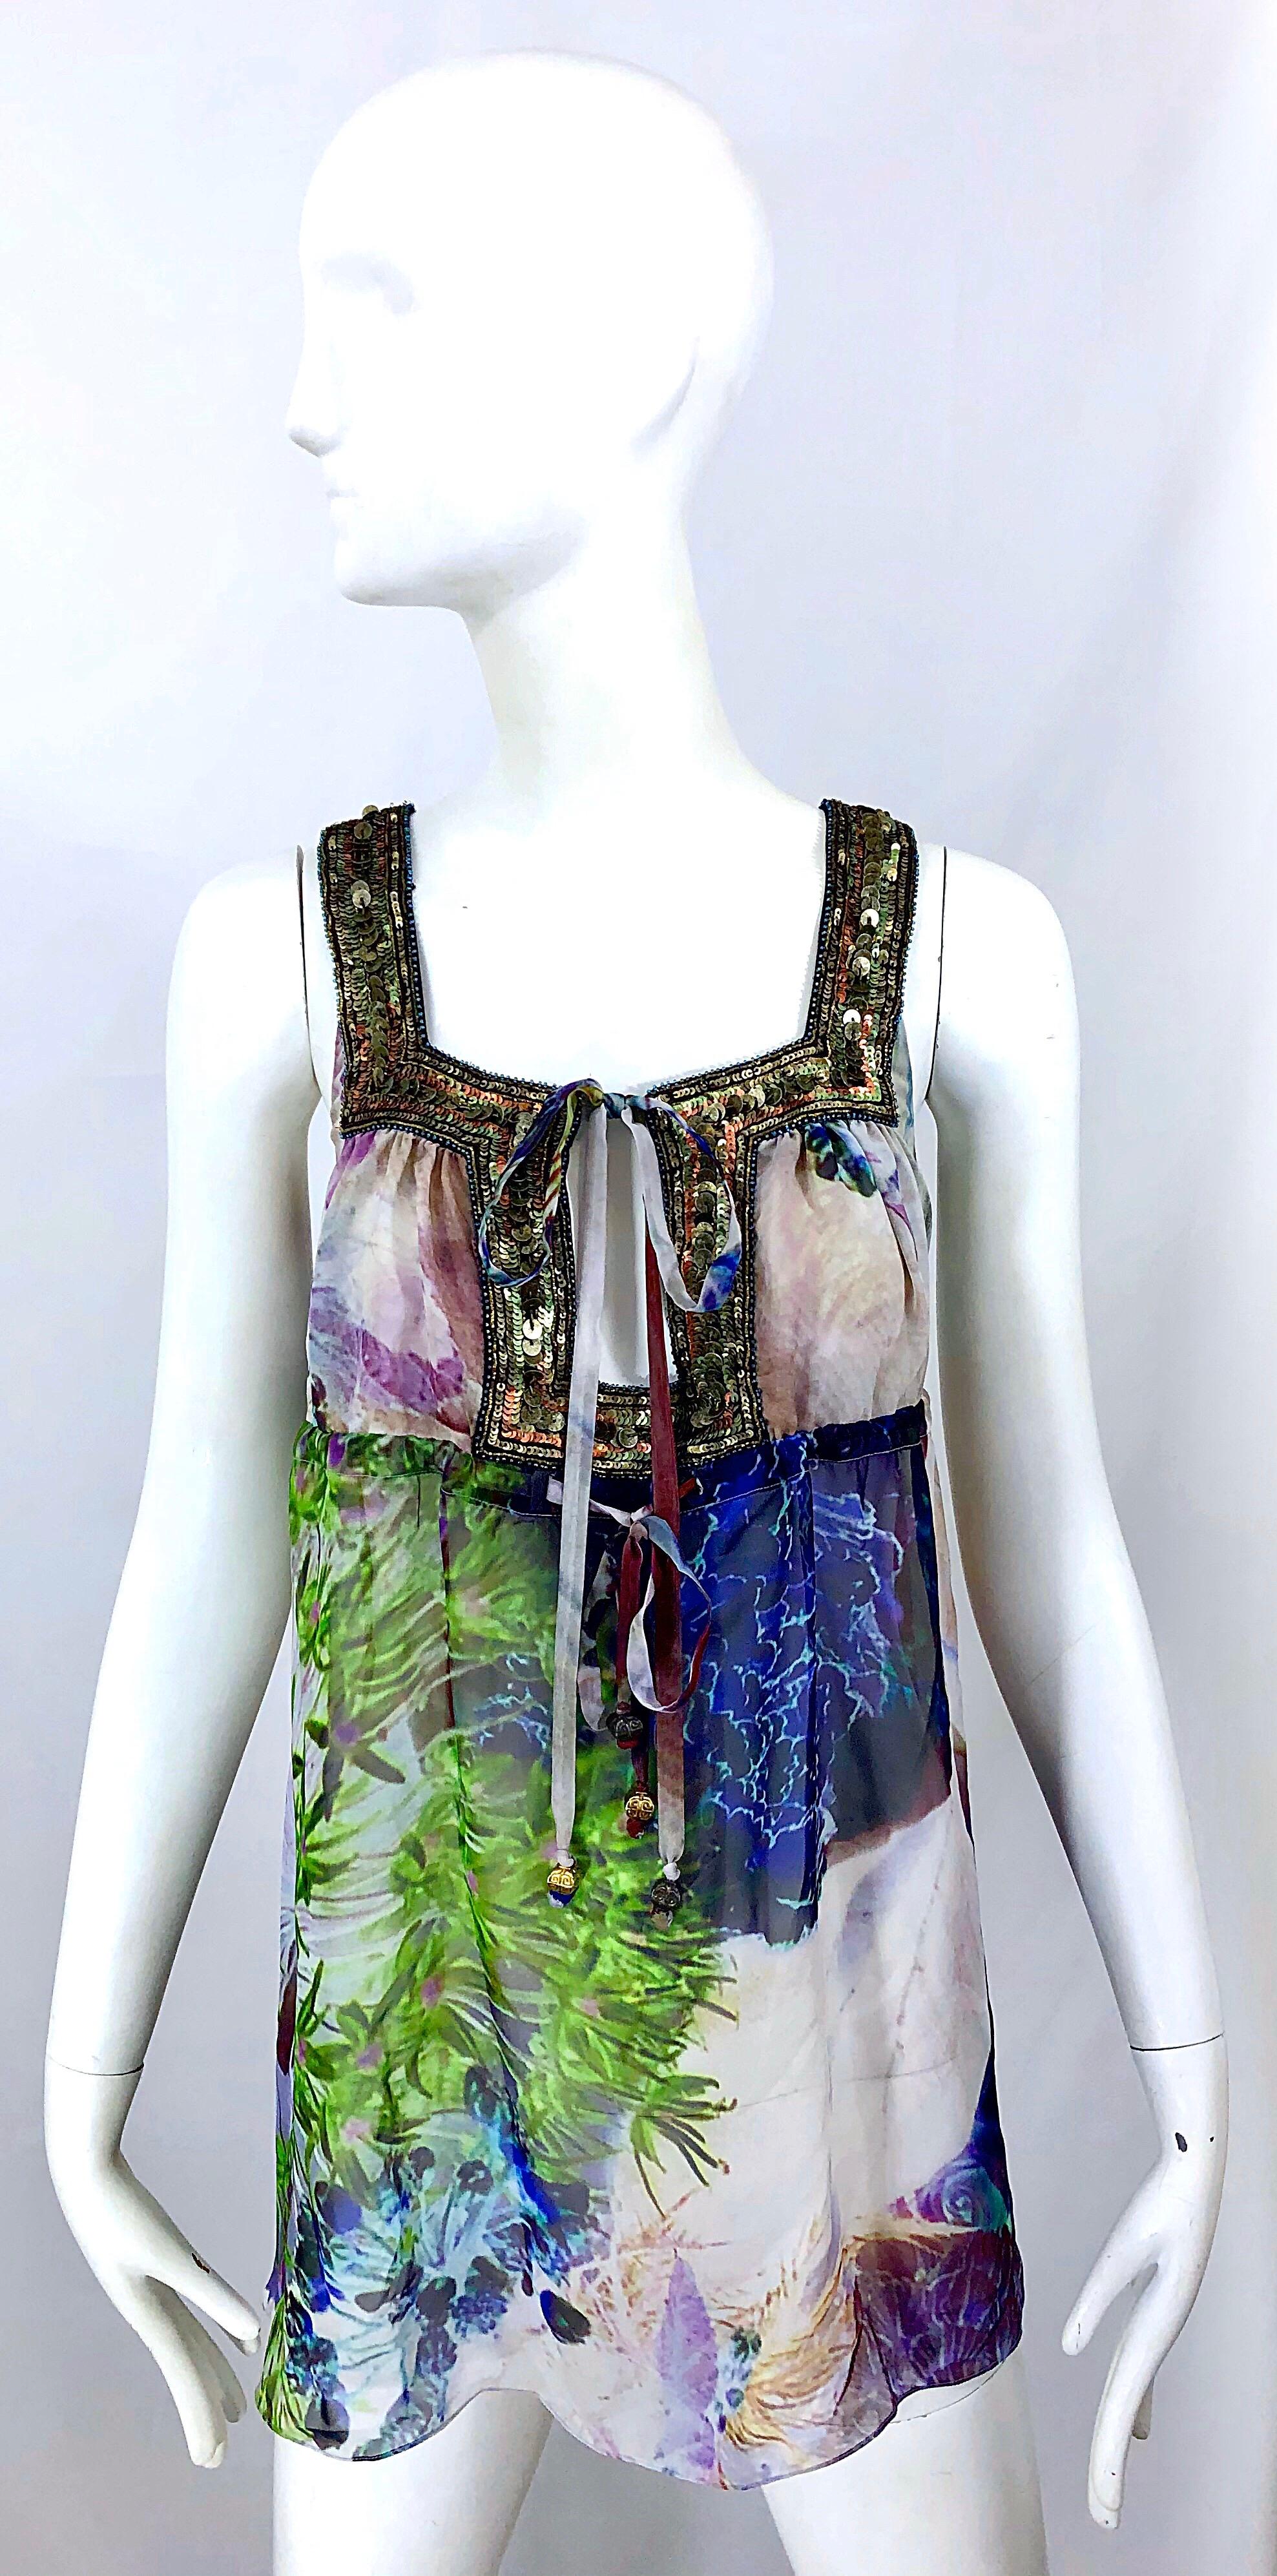 Chic early 2000s MATTHEW WILLIAMSON geography print chiffon sequined empire waist sleeveless blouse! Features prints of leaves, clouds, the ocean, etc. throughout. Vibrant colors of blue, green, lilac, purple, and pink. Rose gold and bronze sequins